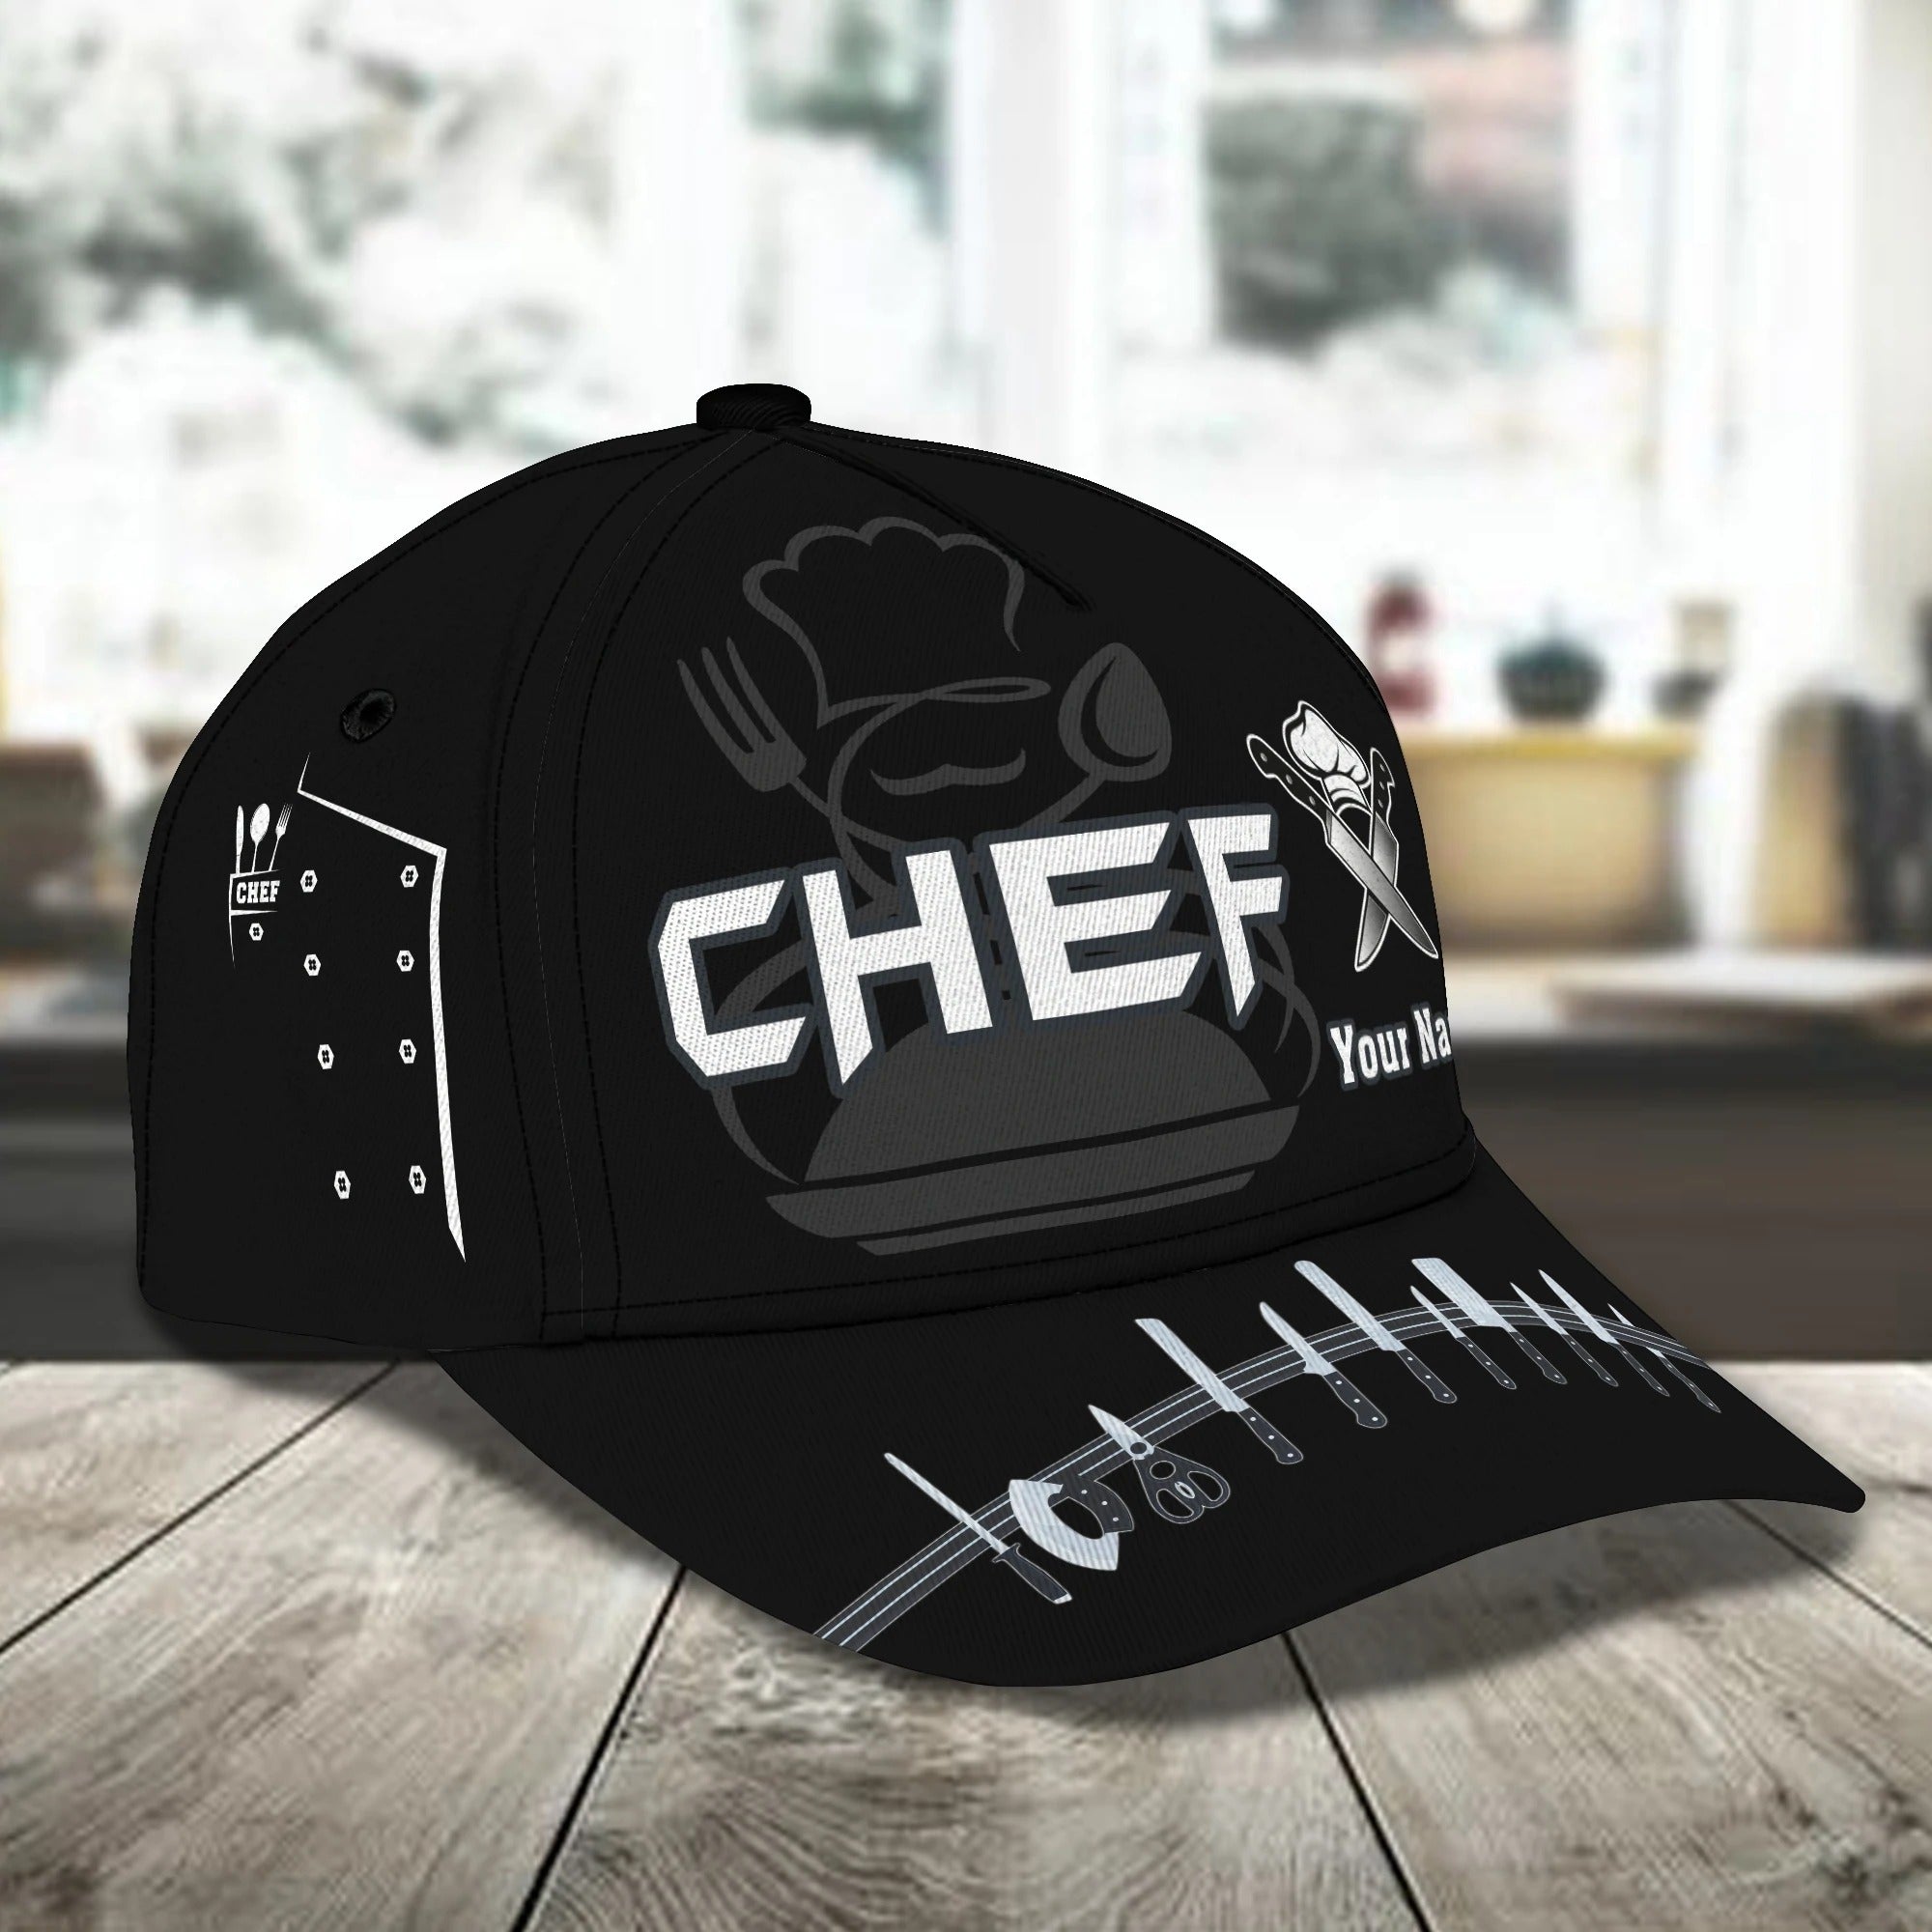 Personalized 3D Full Print Baseball Cap For Chef/ Master Chef Classic Cap Hat/ Gift For Master Chef